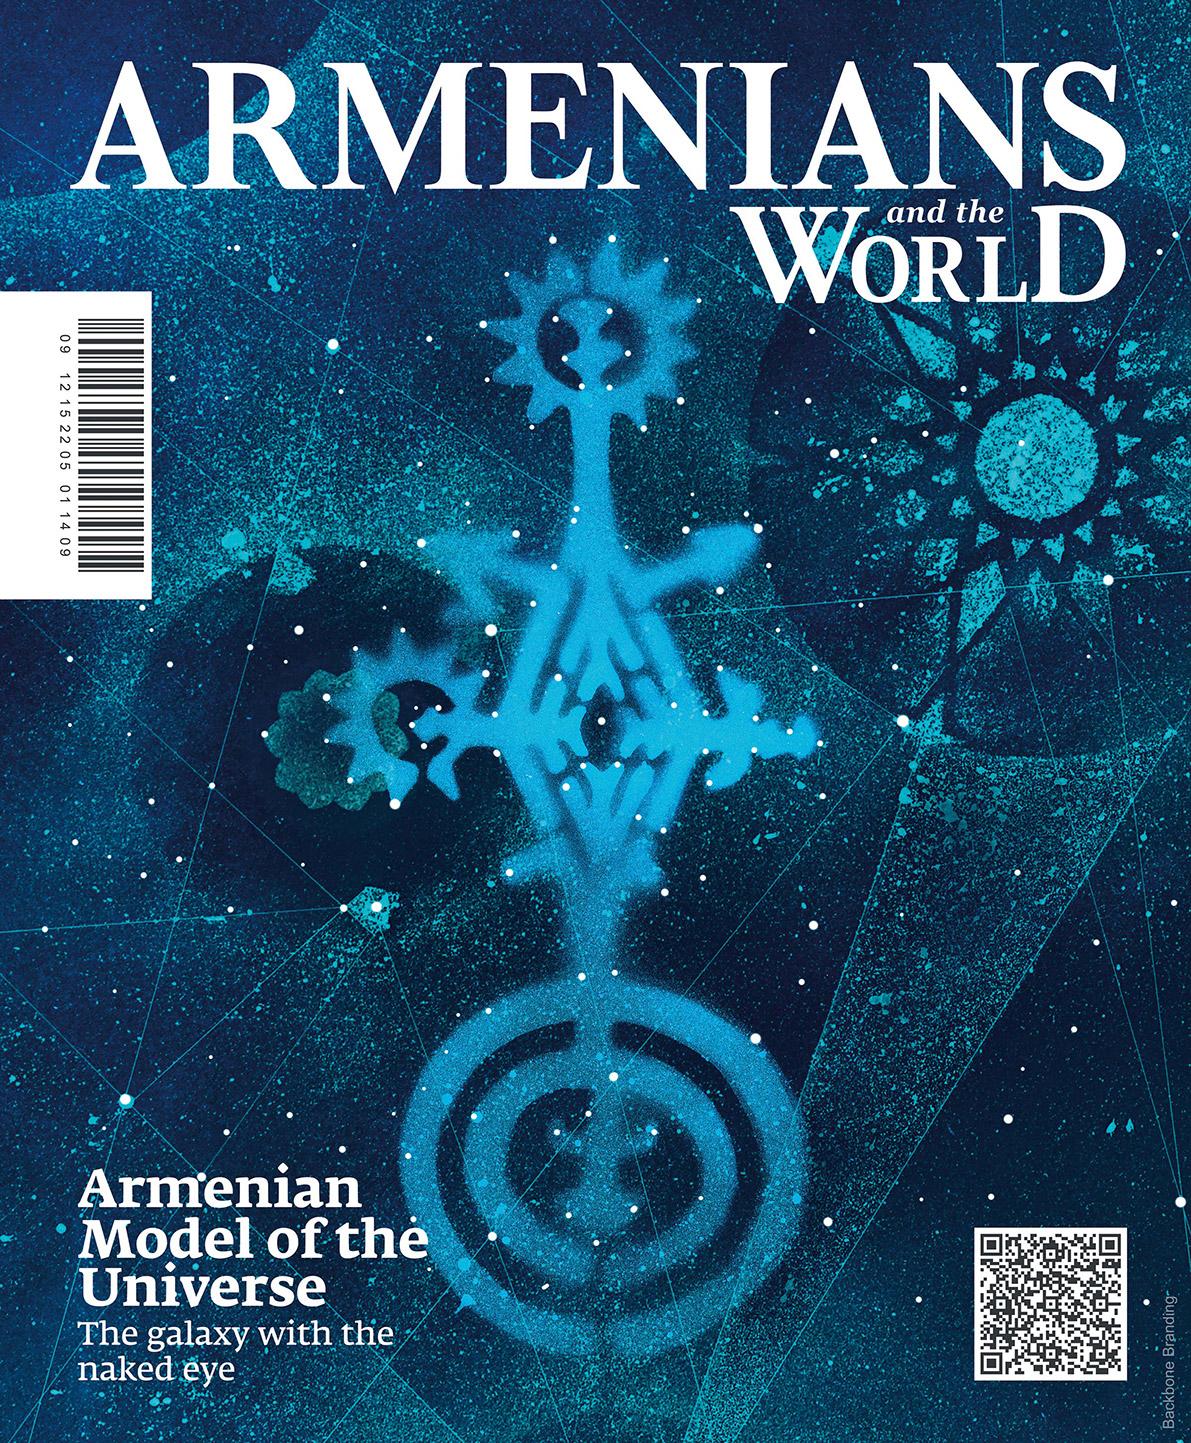 Armenian-and-the-world-50